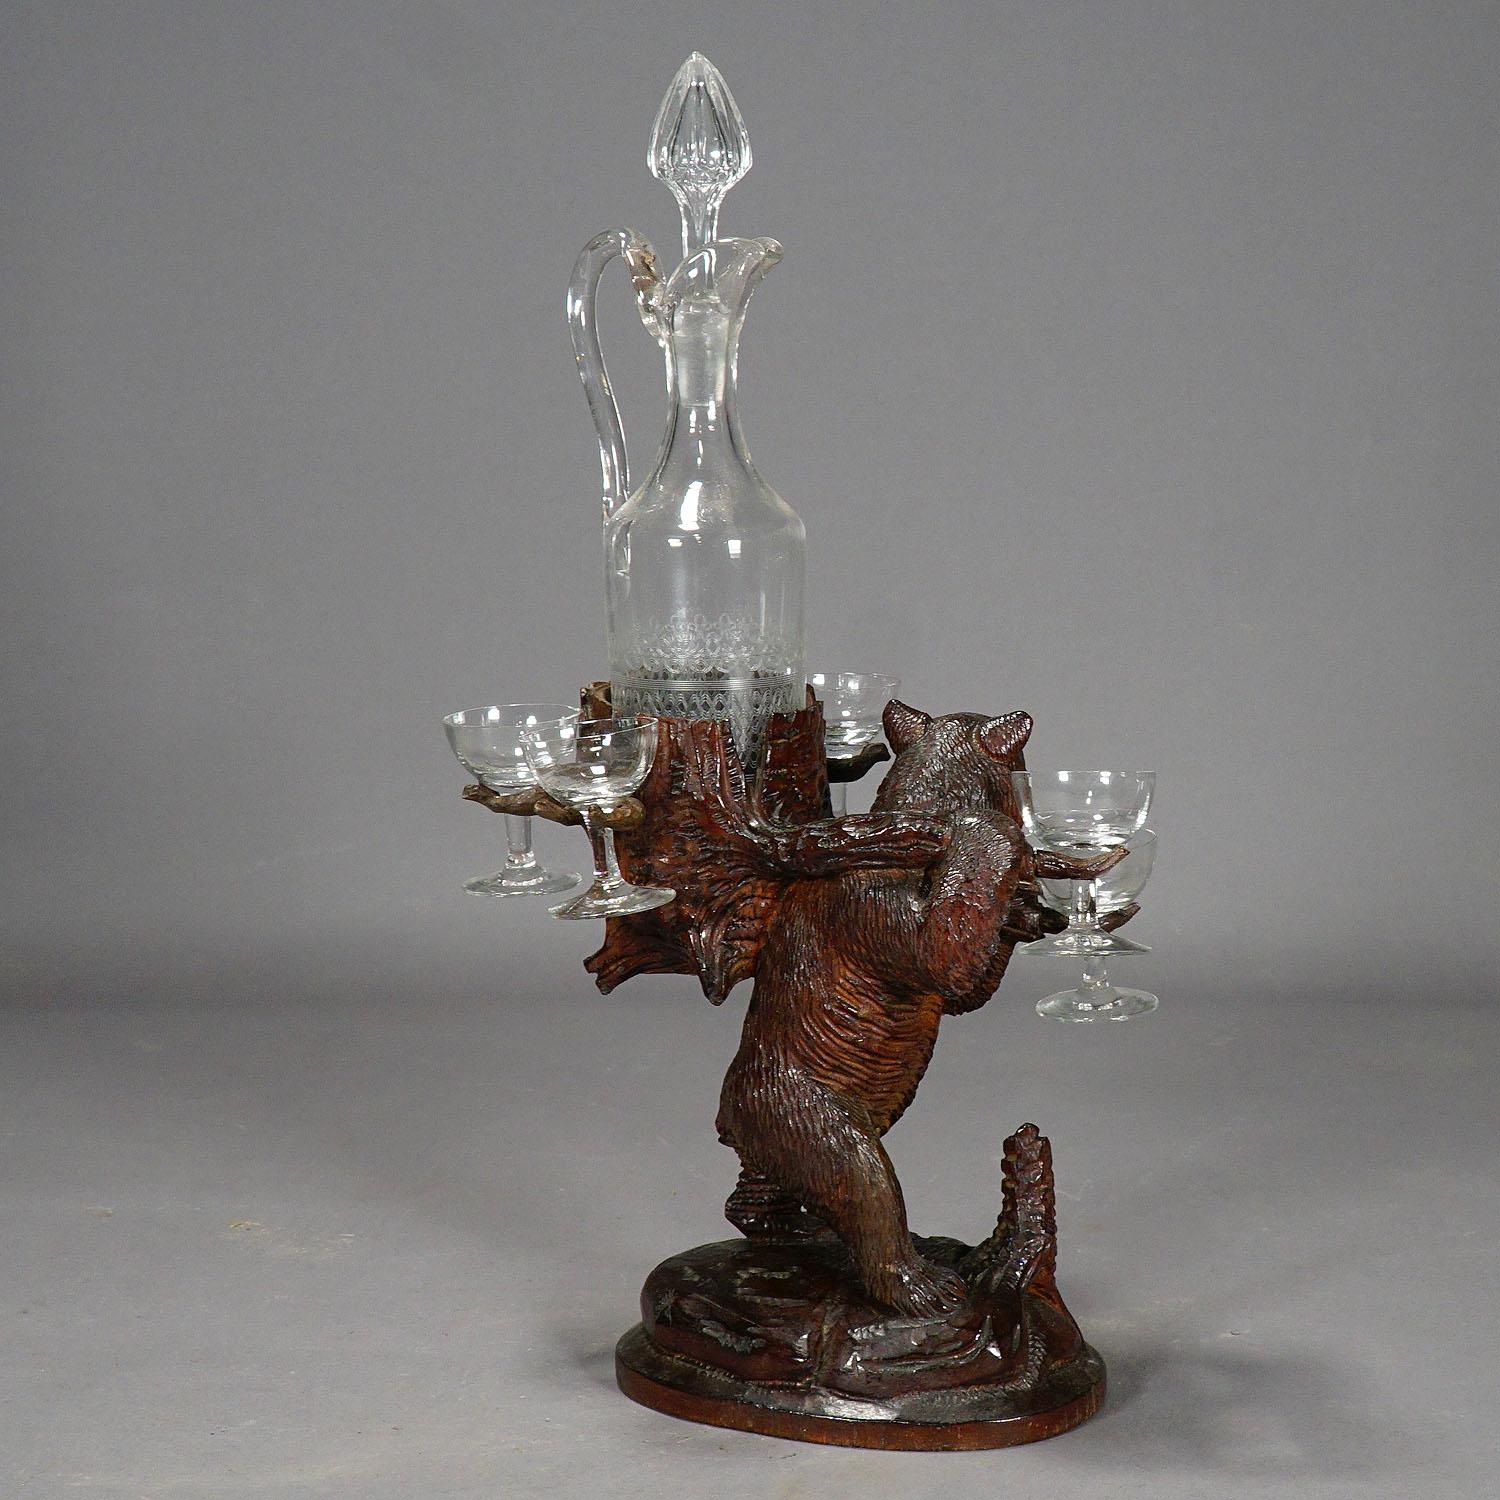 Item e6177
A carved linden wood decanter / liqueur Stand modelled as a hiking bear with basket on his back. with engraved crystal decanter and six shot glasses. executed circa 1900, swiss brienz.

Measures: Width 9.45